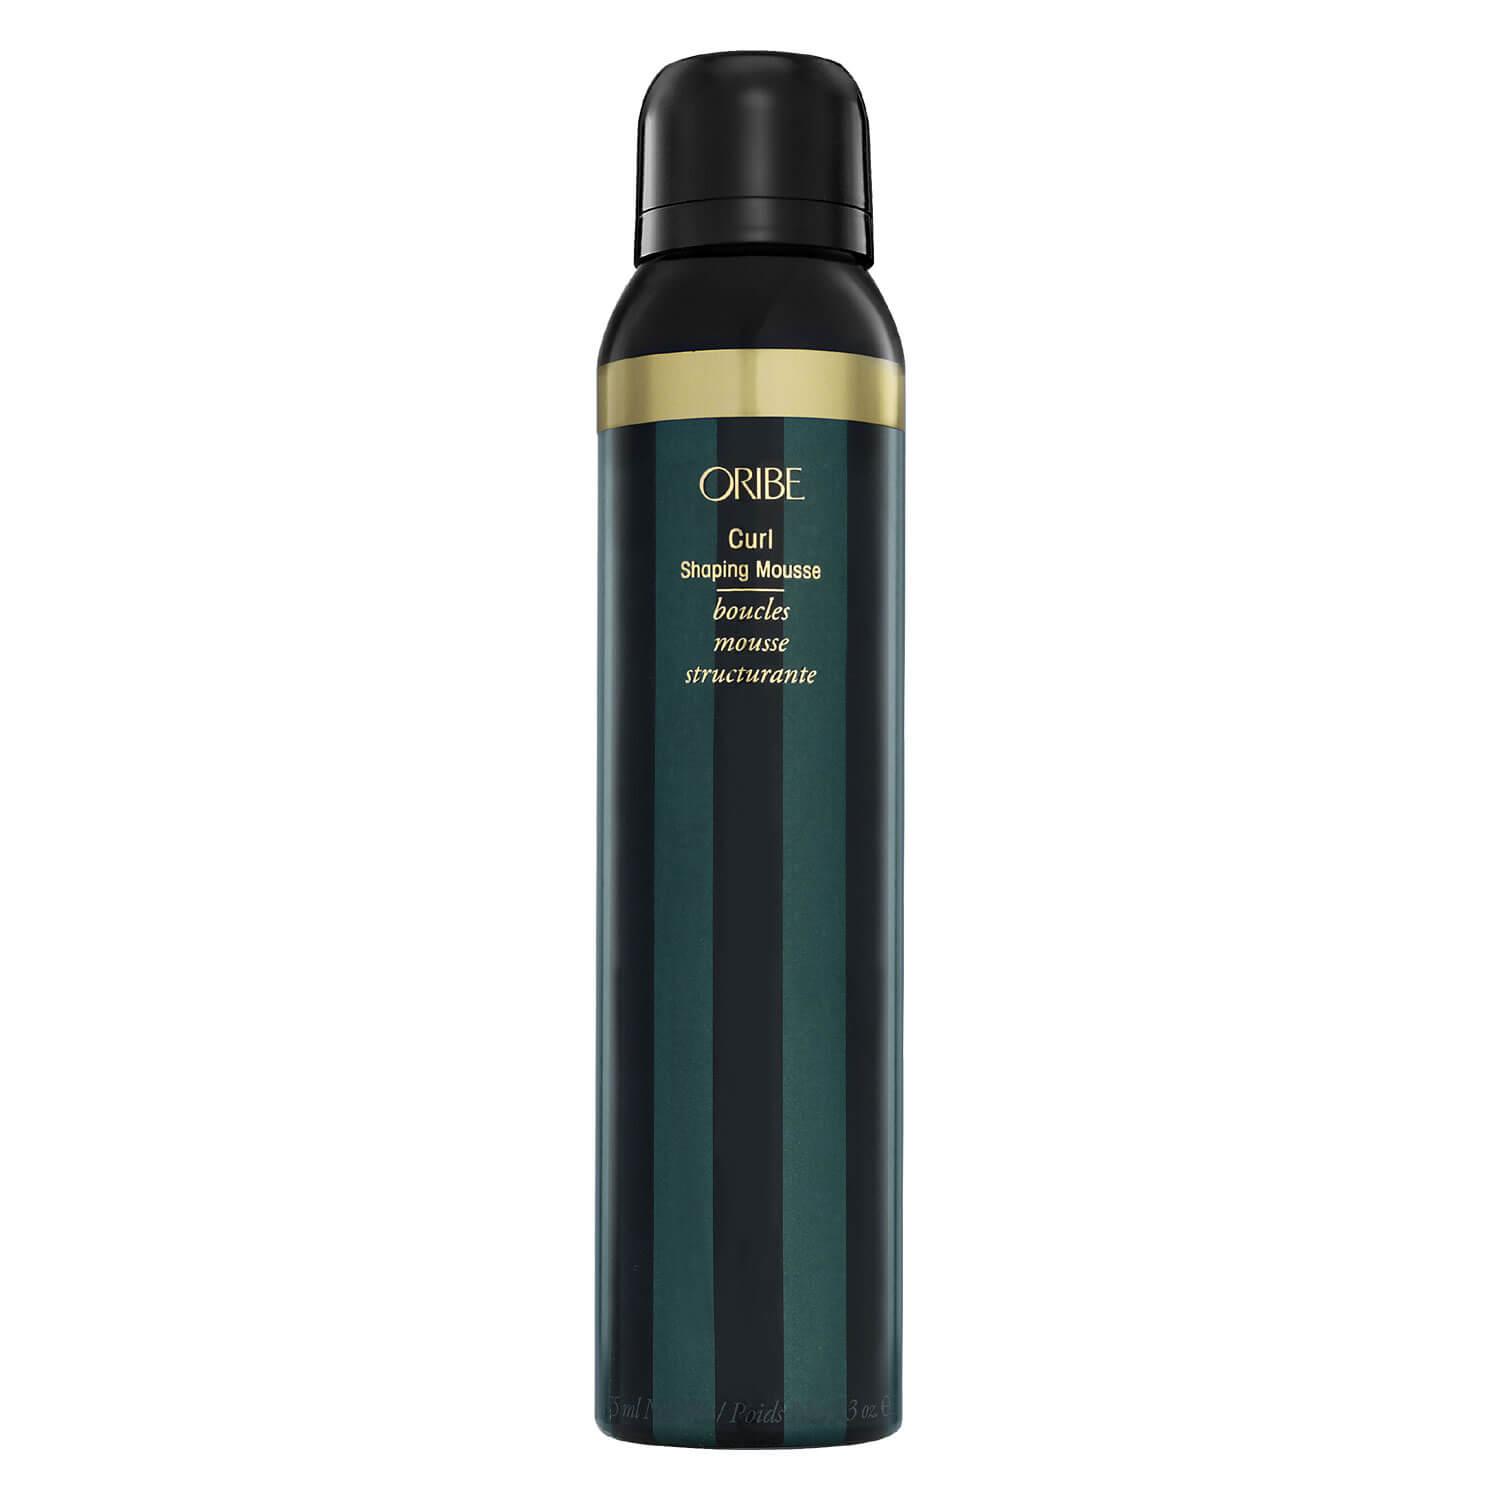 Oribe Style - Curl Shaping Mousse